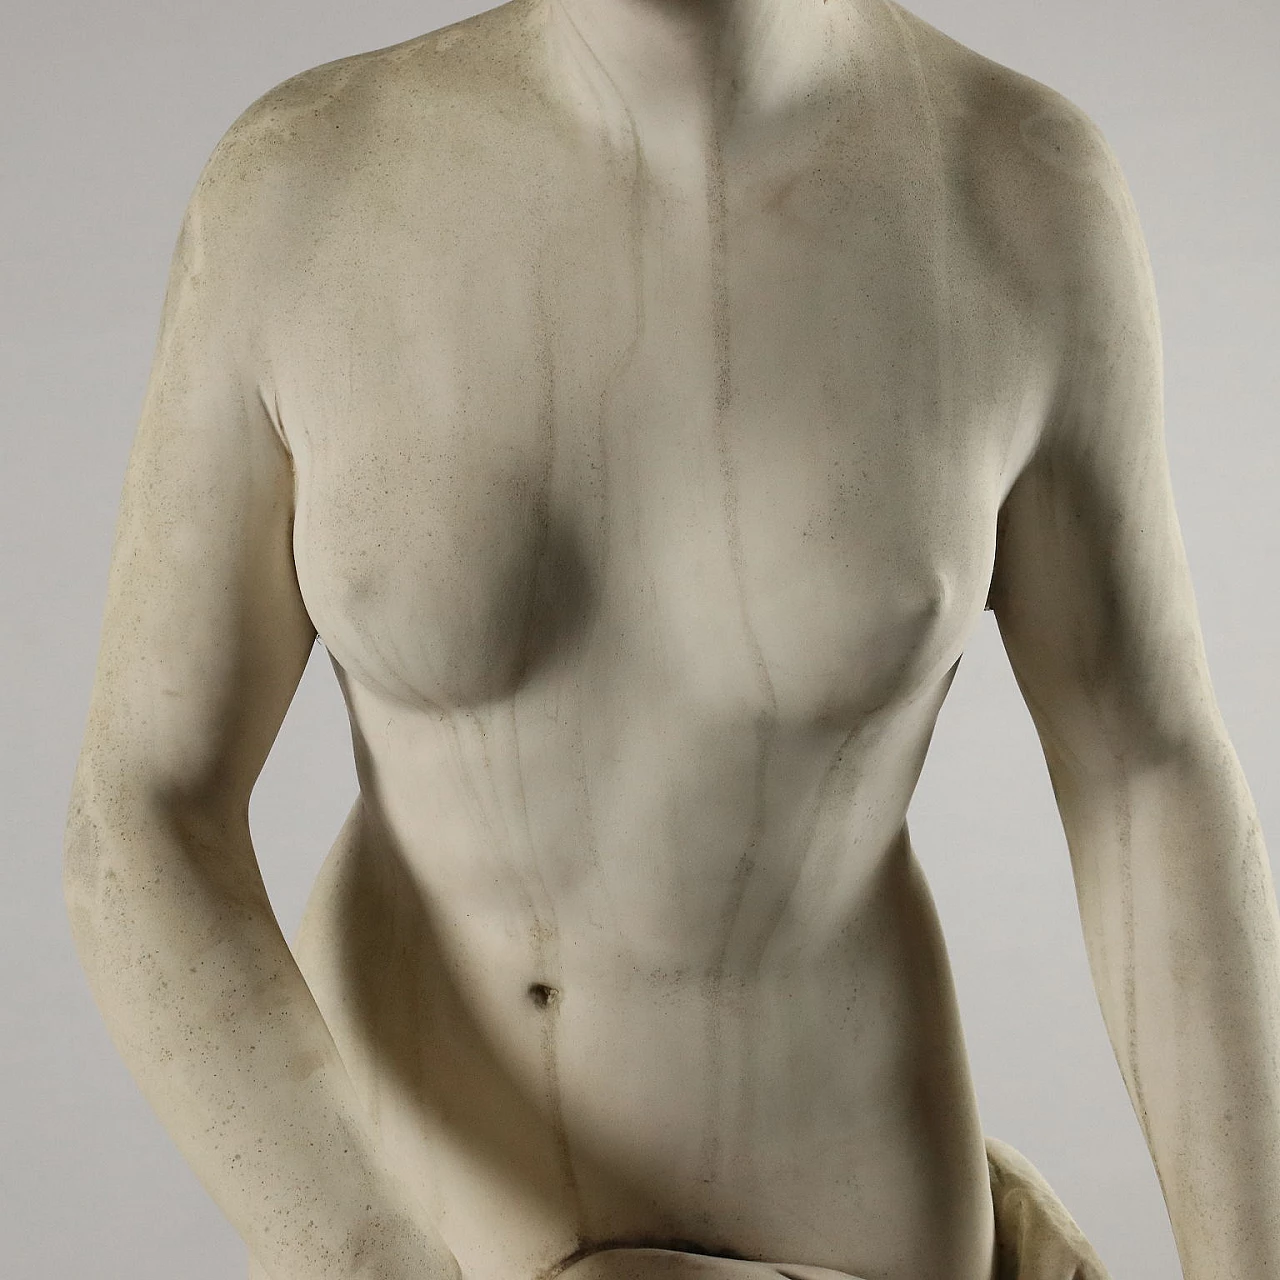 Dal Torrione, The bather, sythetic marble sculpture 6